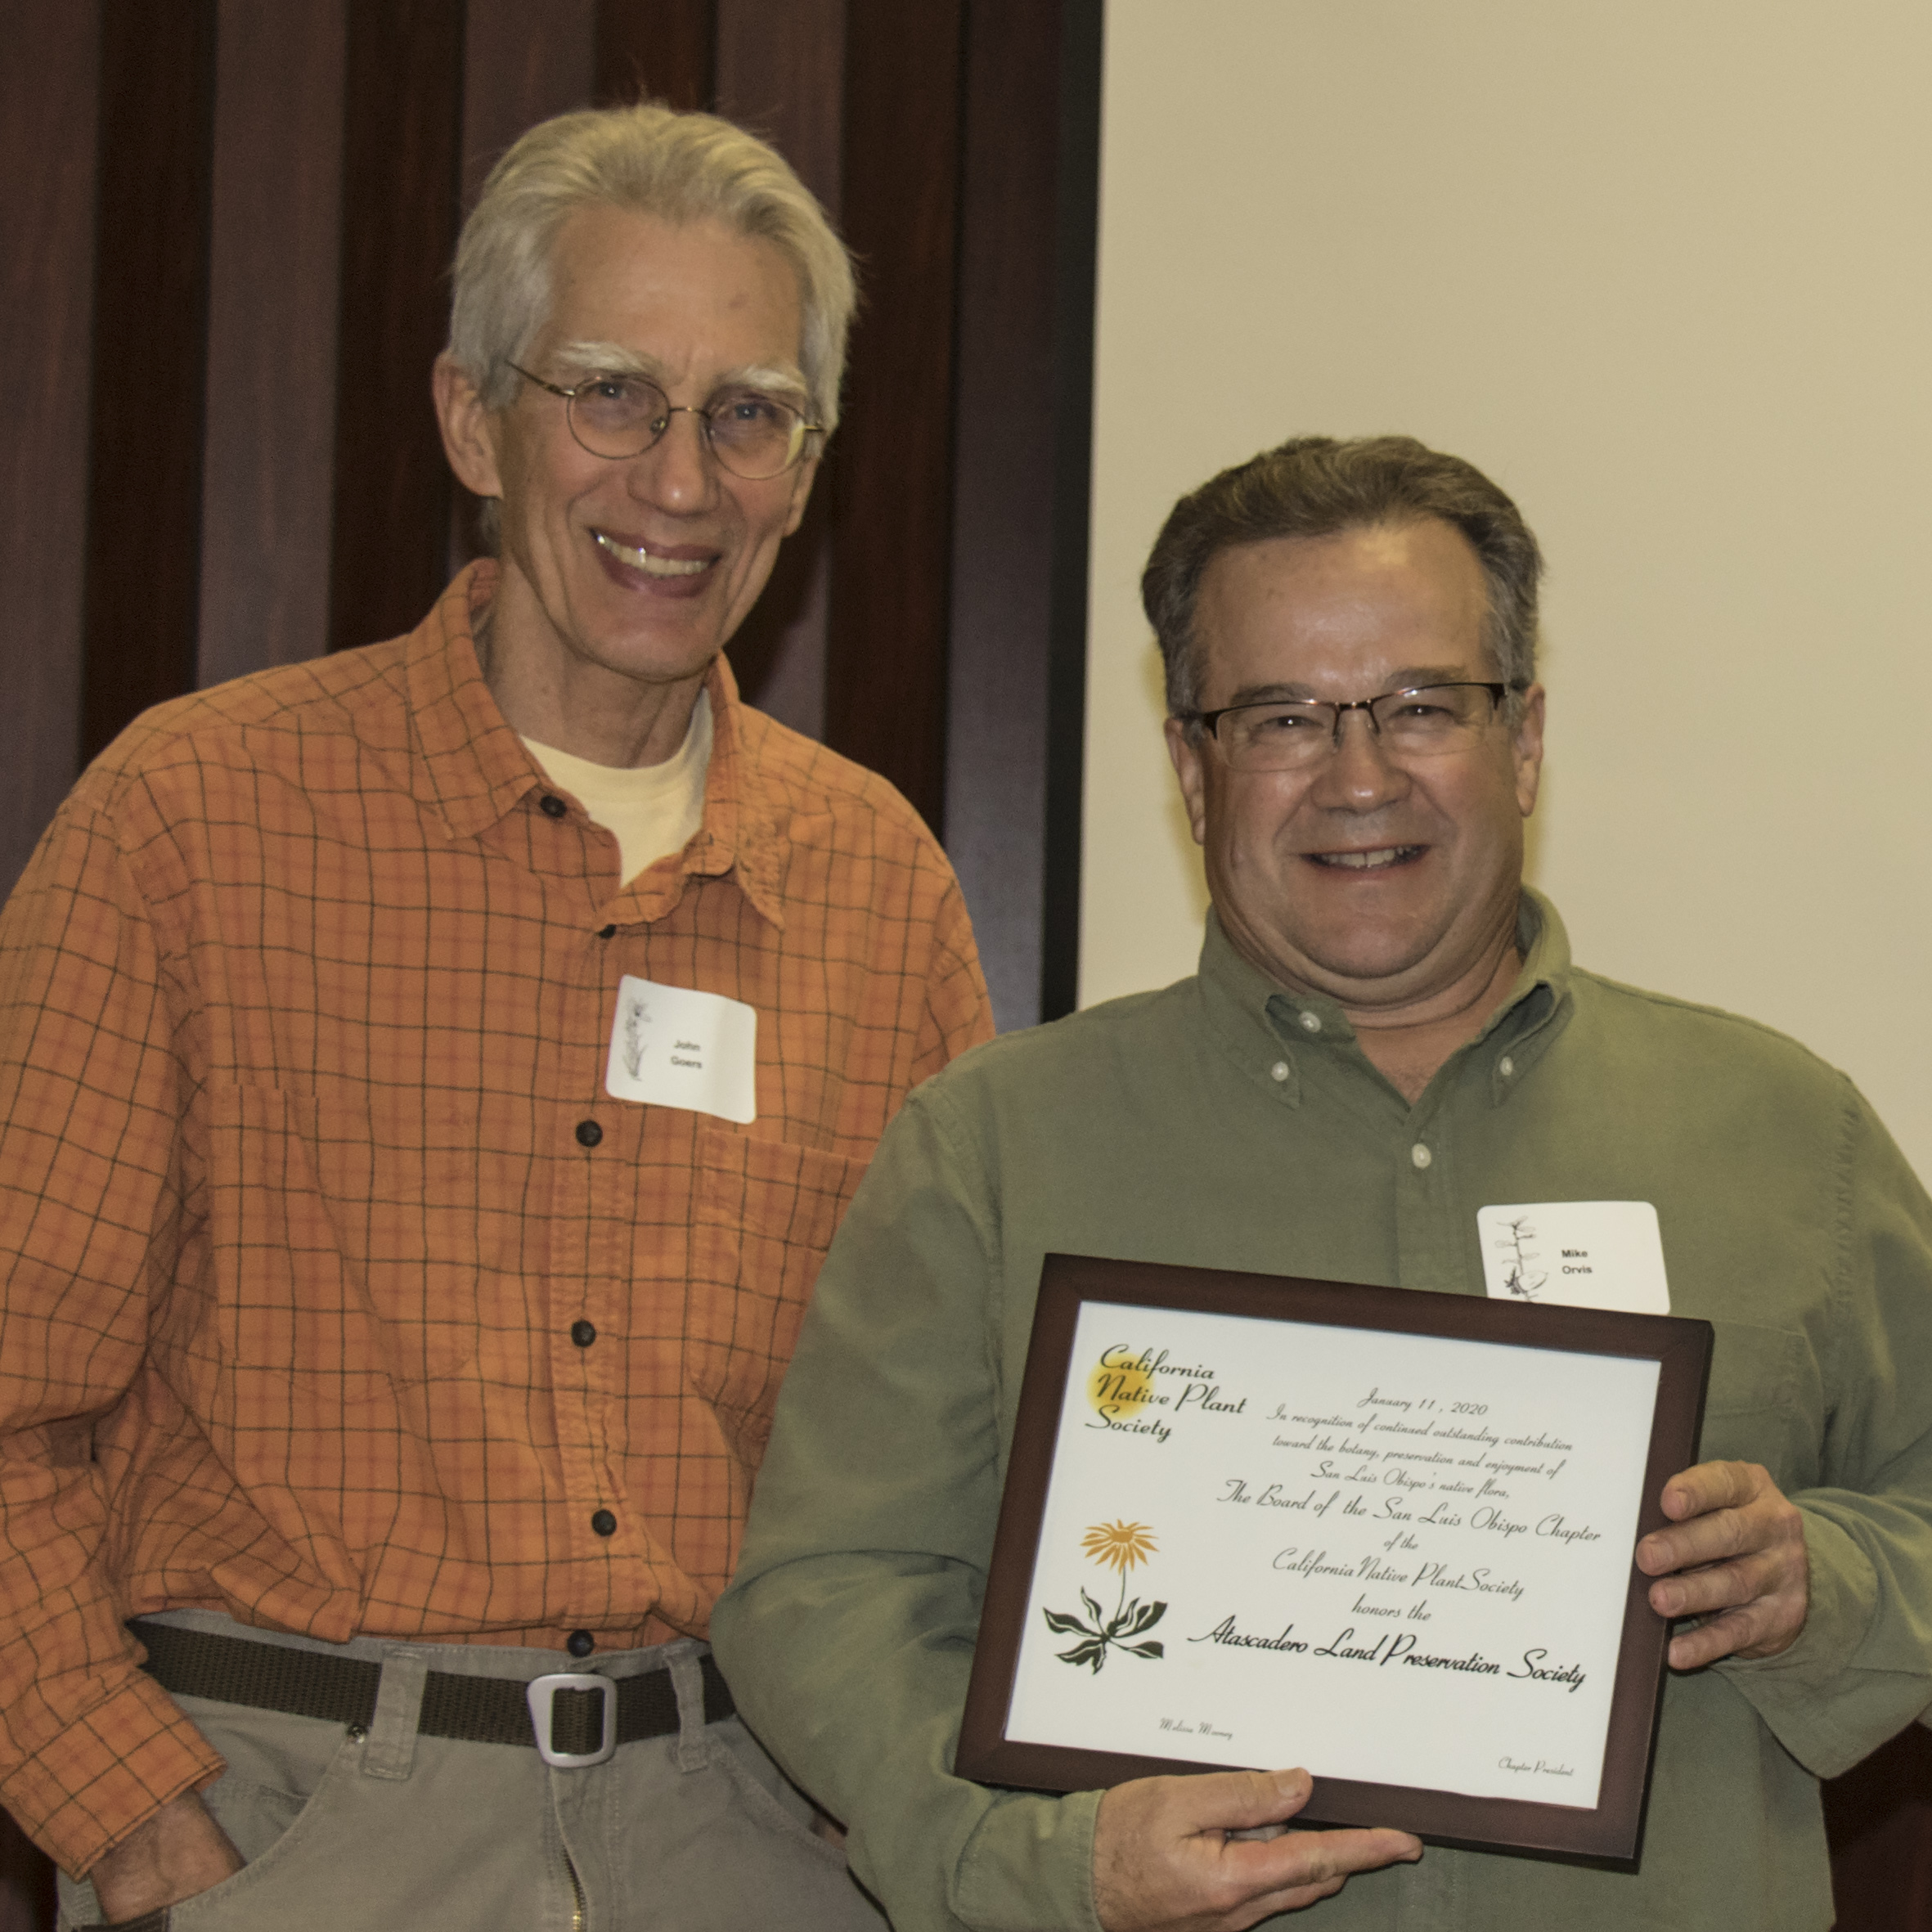 John Goers (Vice President) and Mike Orvis (President) with award!